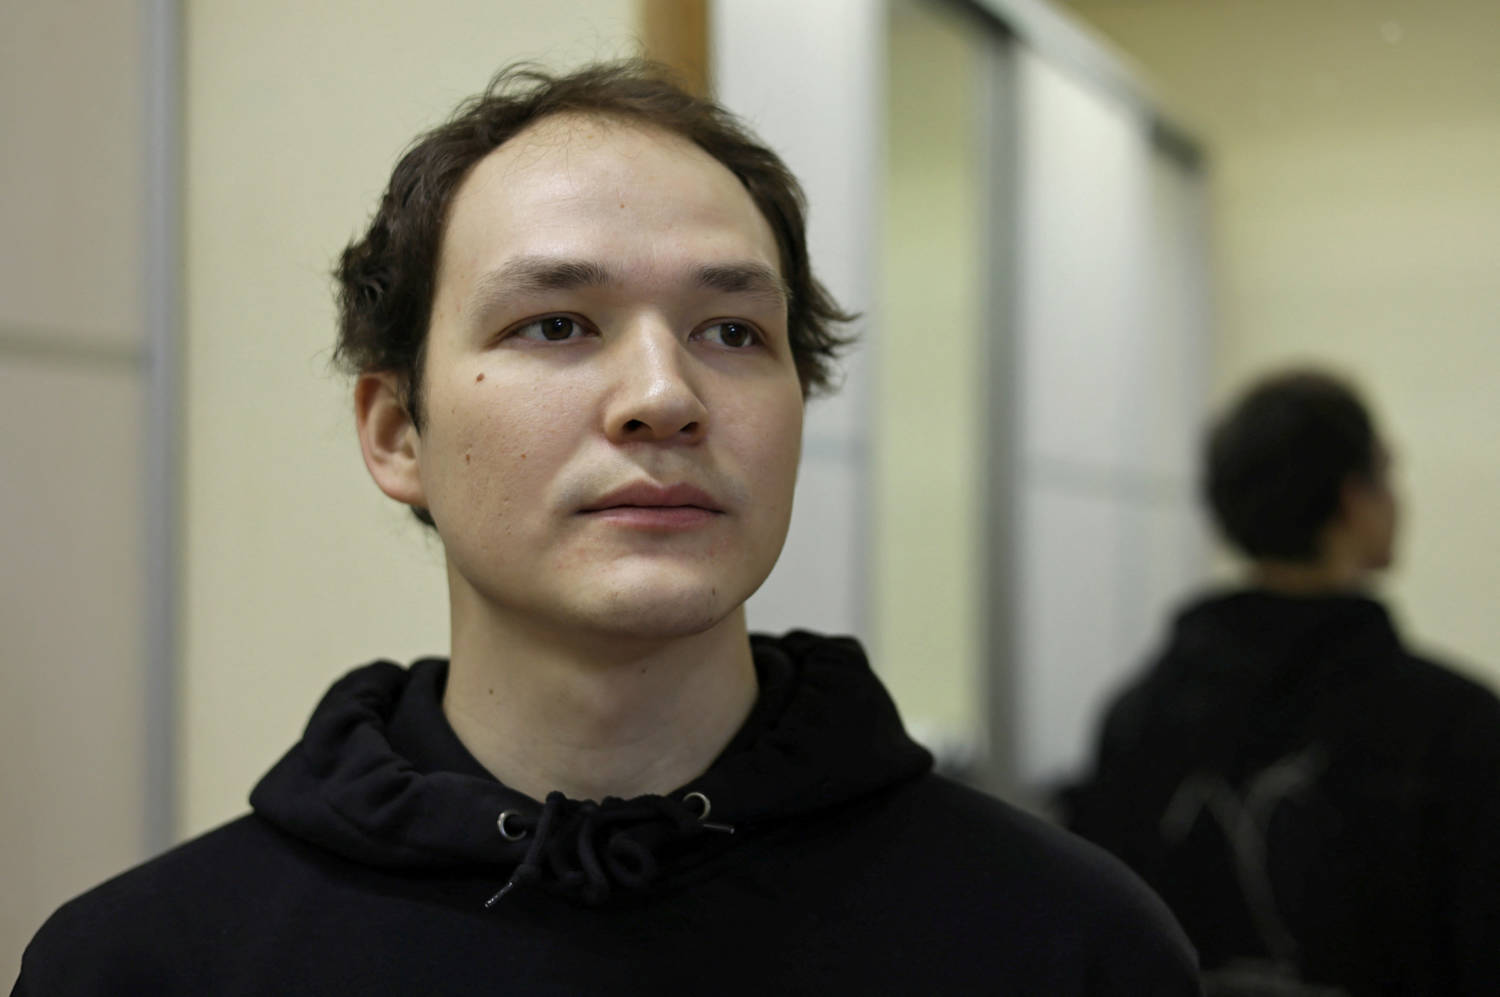 Maxim Golomaryev, A University Student And Folk Dancer, Poses For A Picture In Yakutsk